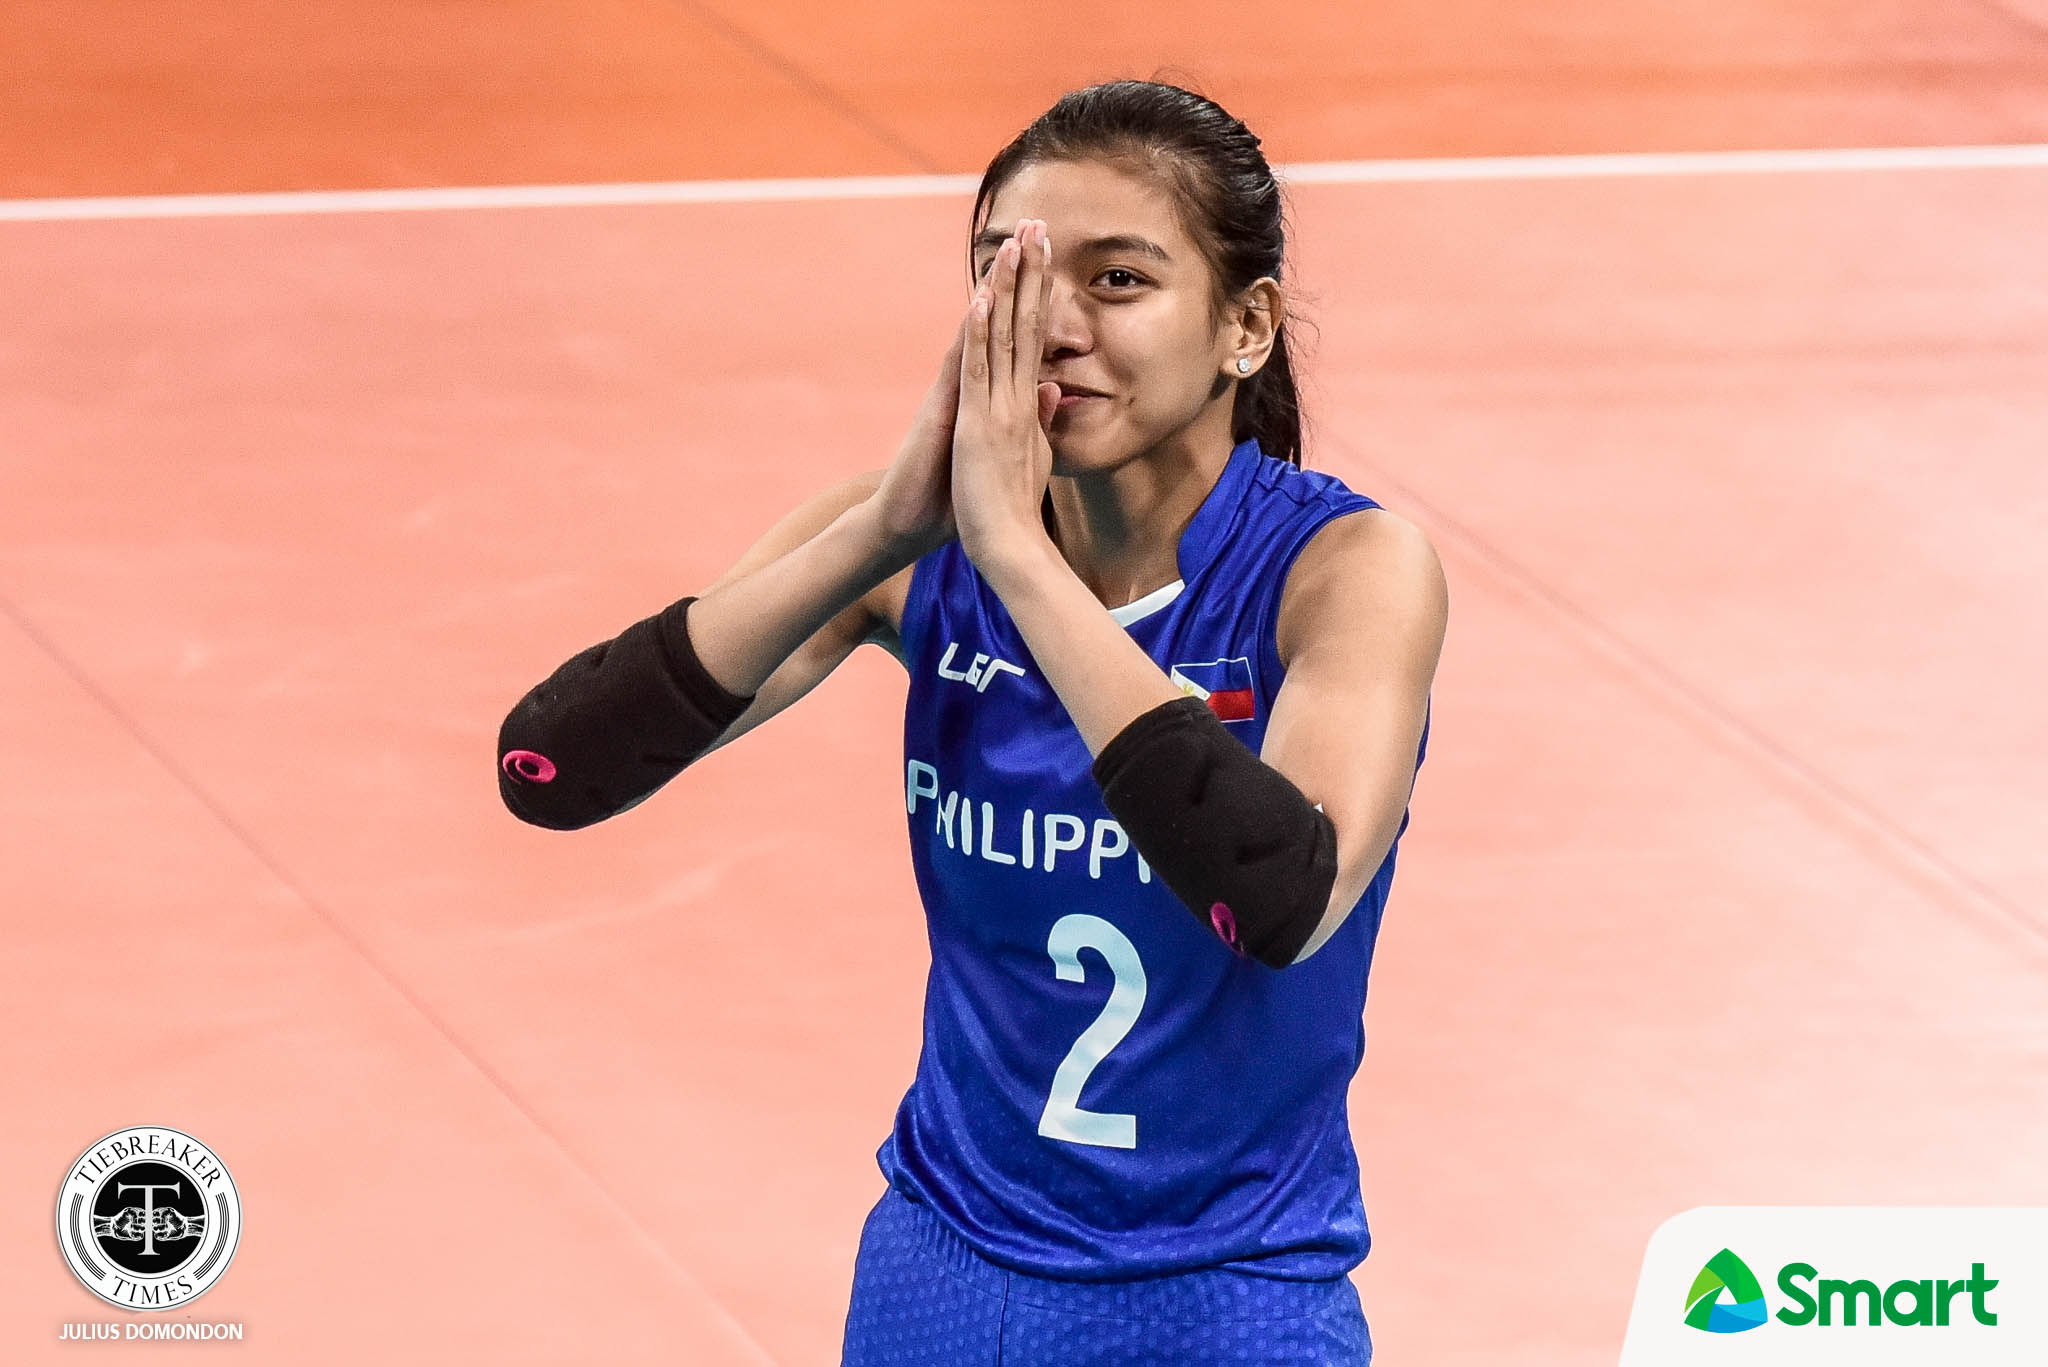 2019-sea-games-volleyball-indonesia-def-philippines-alyssa-valdez PWNVT captainship motivates Valdez to push harder in therapy 32nd SEA Games News PVL Volleyball  - philippine sports news